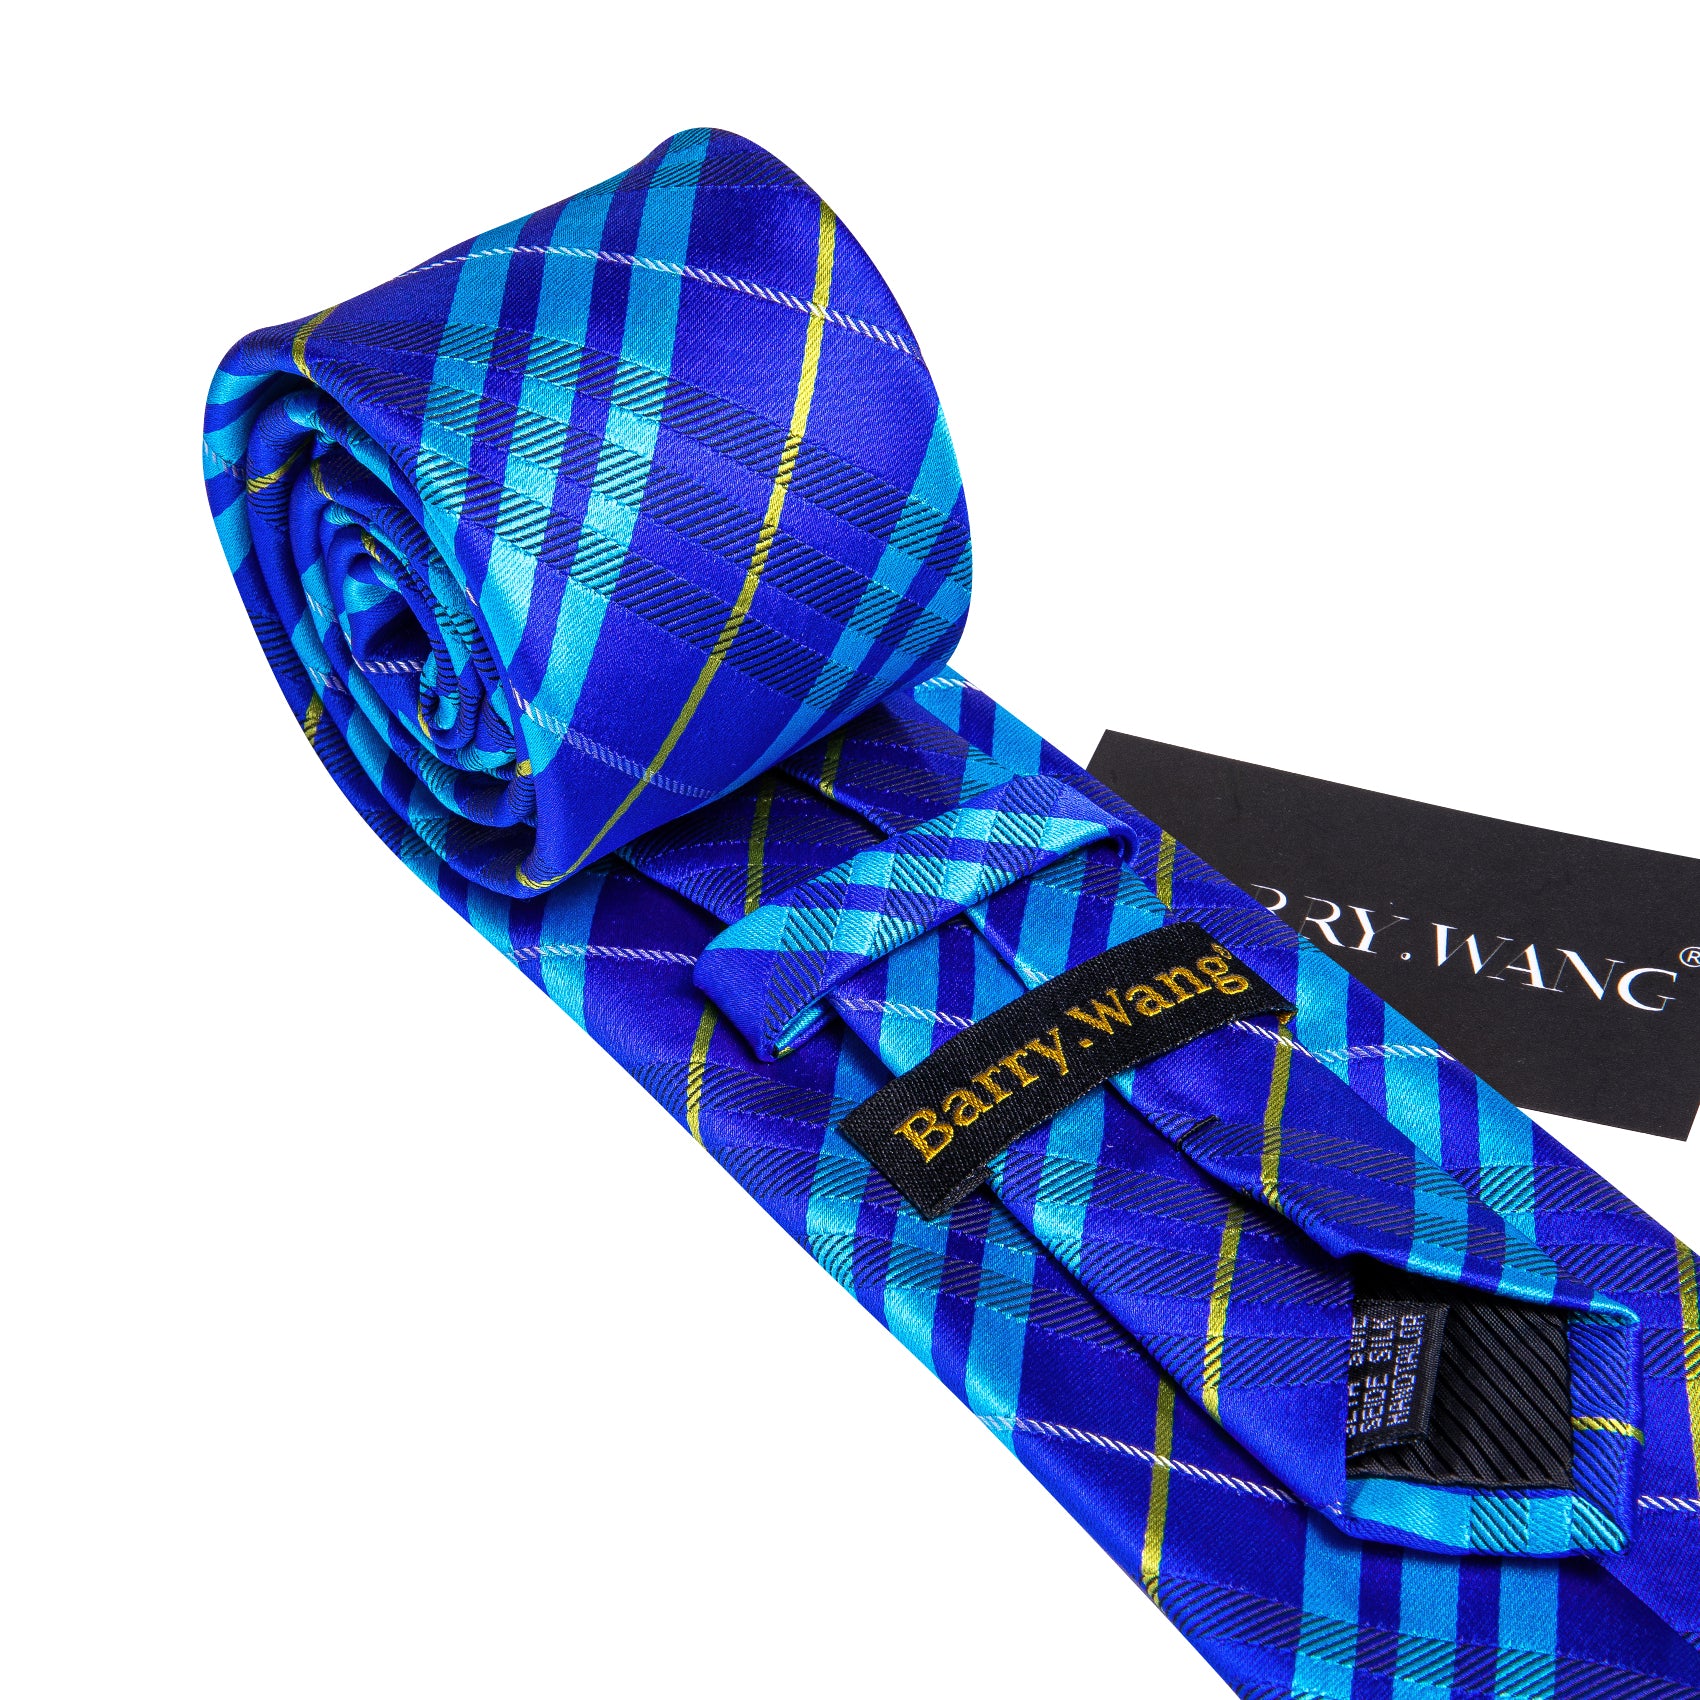 Royal Blue Necktie Sky blue stripes Yellow lines pattern checkered Tie for men with black suit  white shirt 